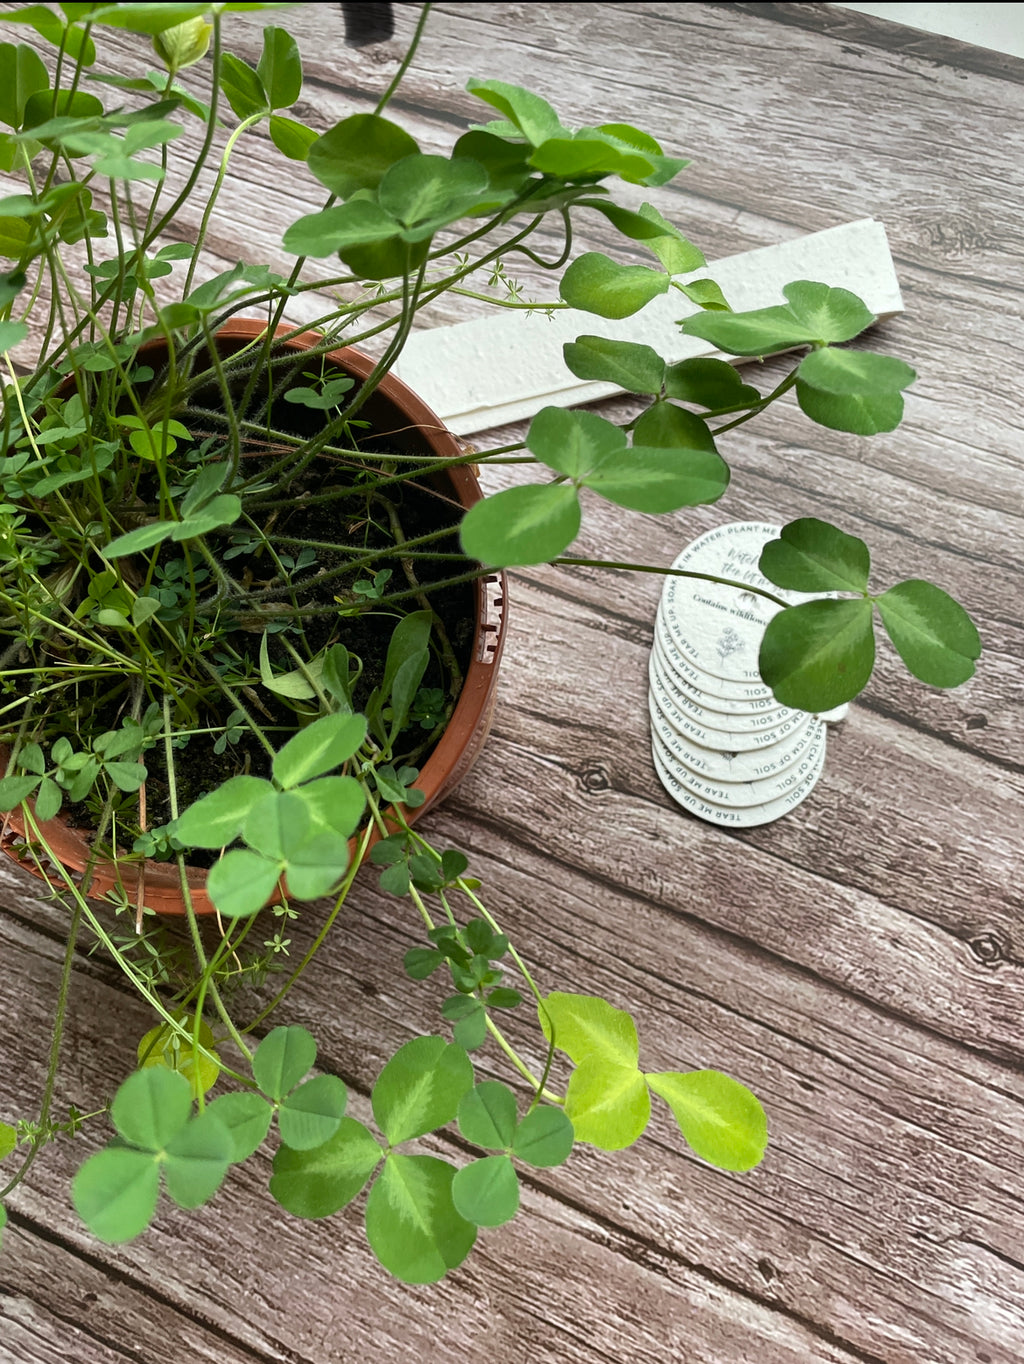 Clover grown from seed paper